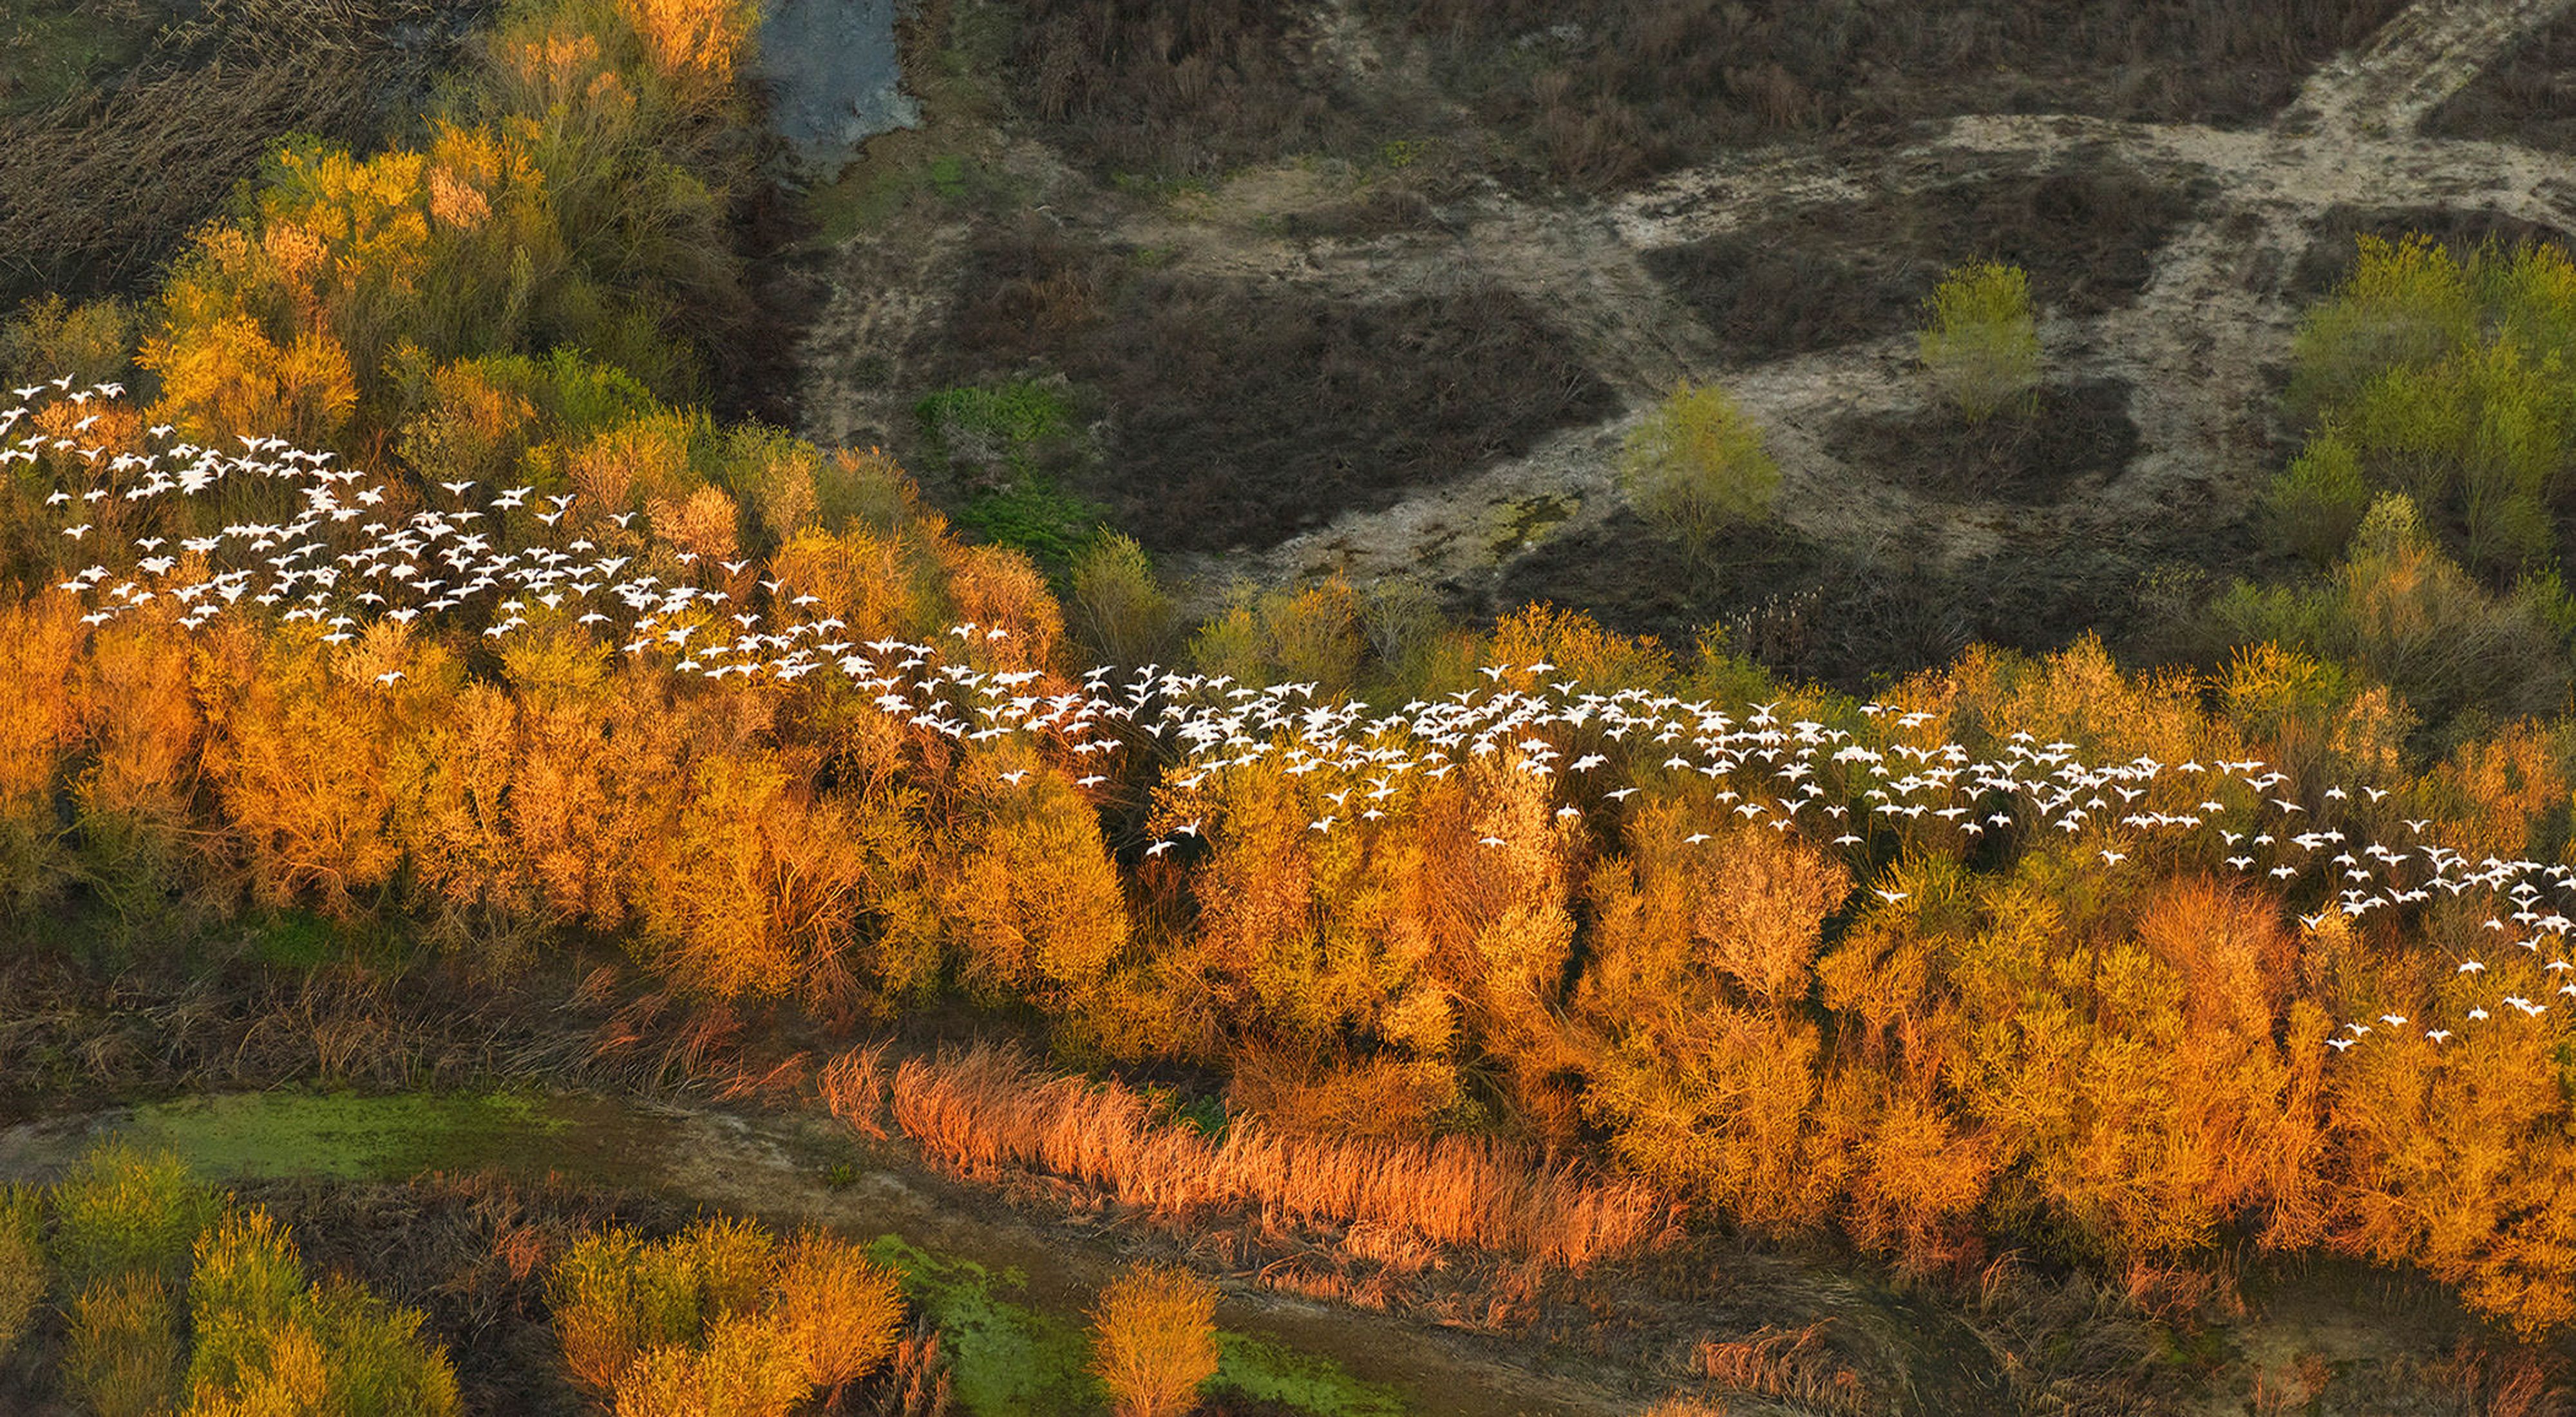 Migratory snow geese from above, California. Aerial image (photographed from a plane).